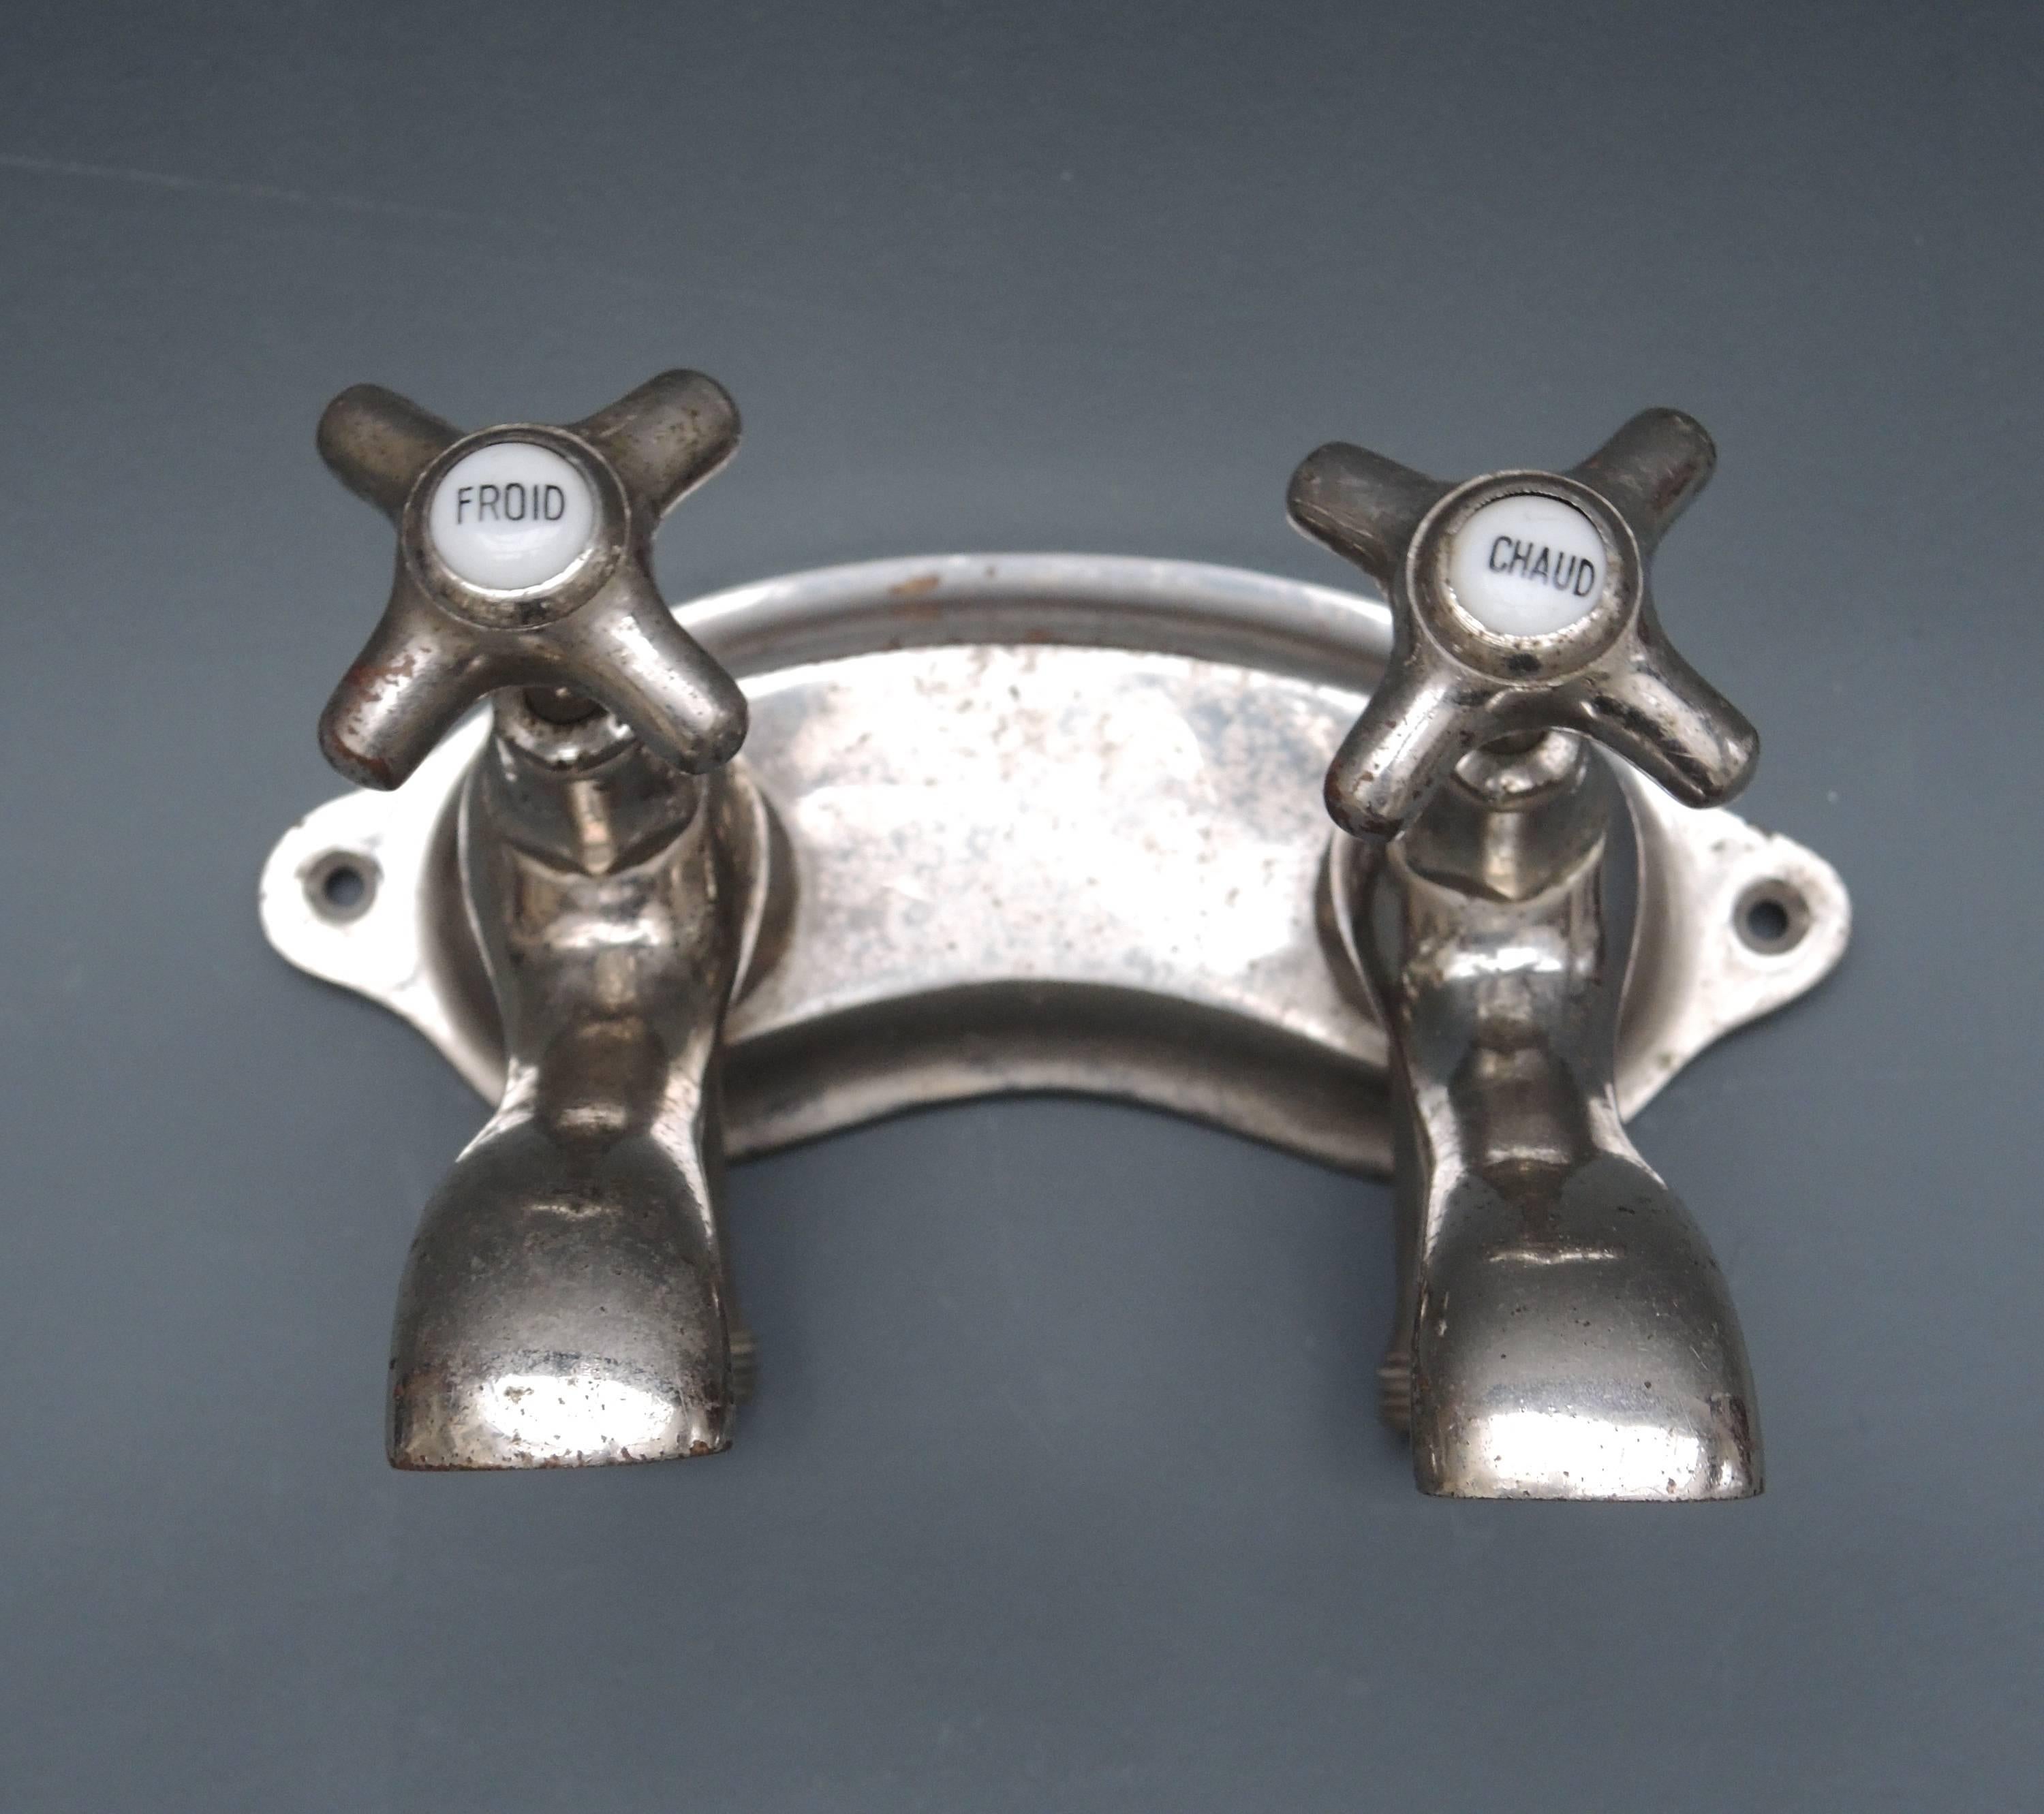 Vintage chromed wall mount faucet set from France. The handles have porcelain insets that read "Froid"(cold) and "Chaud"(hot)
The perfect way to add a bit of old world charm to your home.